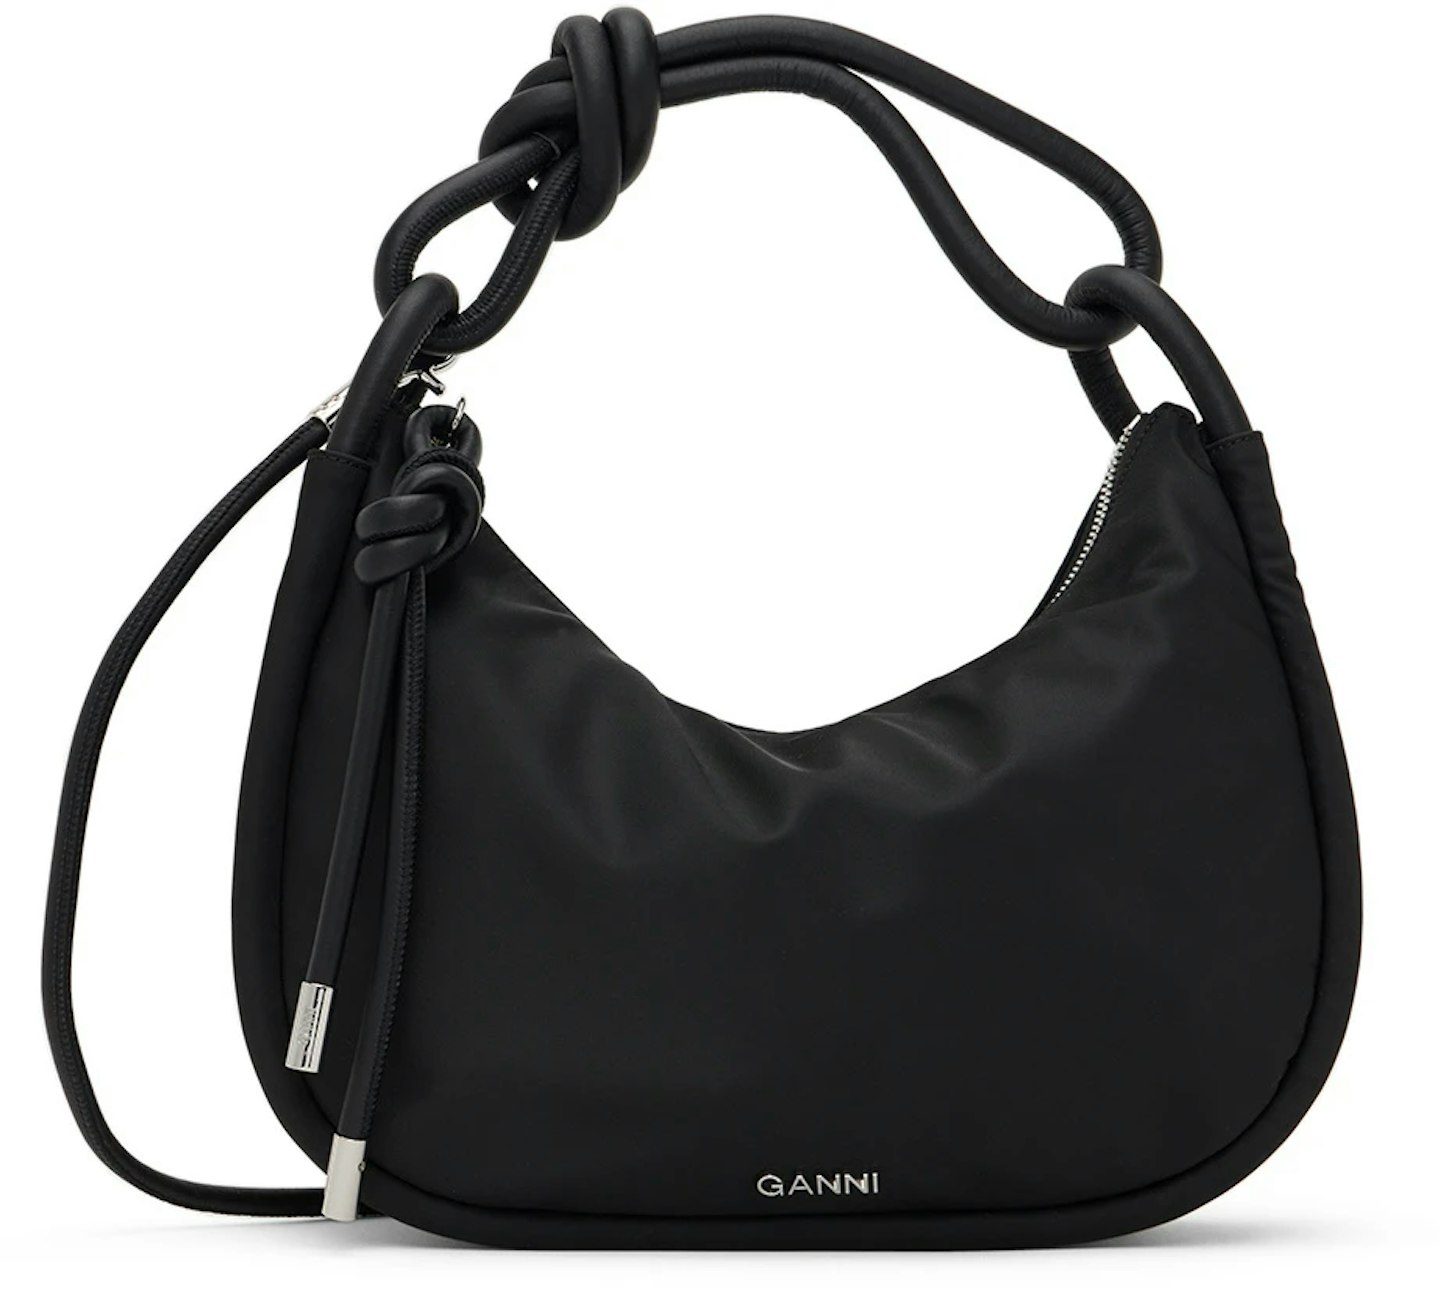 Topshop Cait Crossbody Bag with Ring Detail in Black